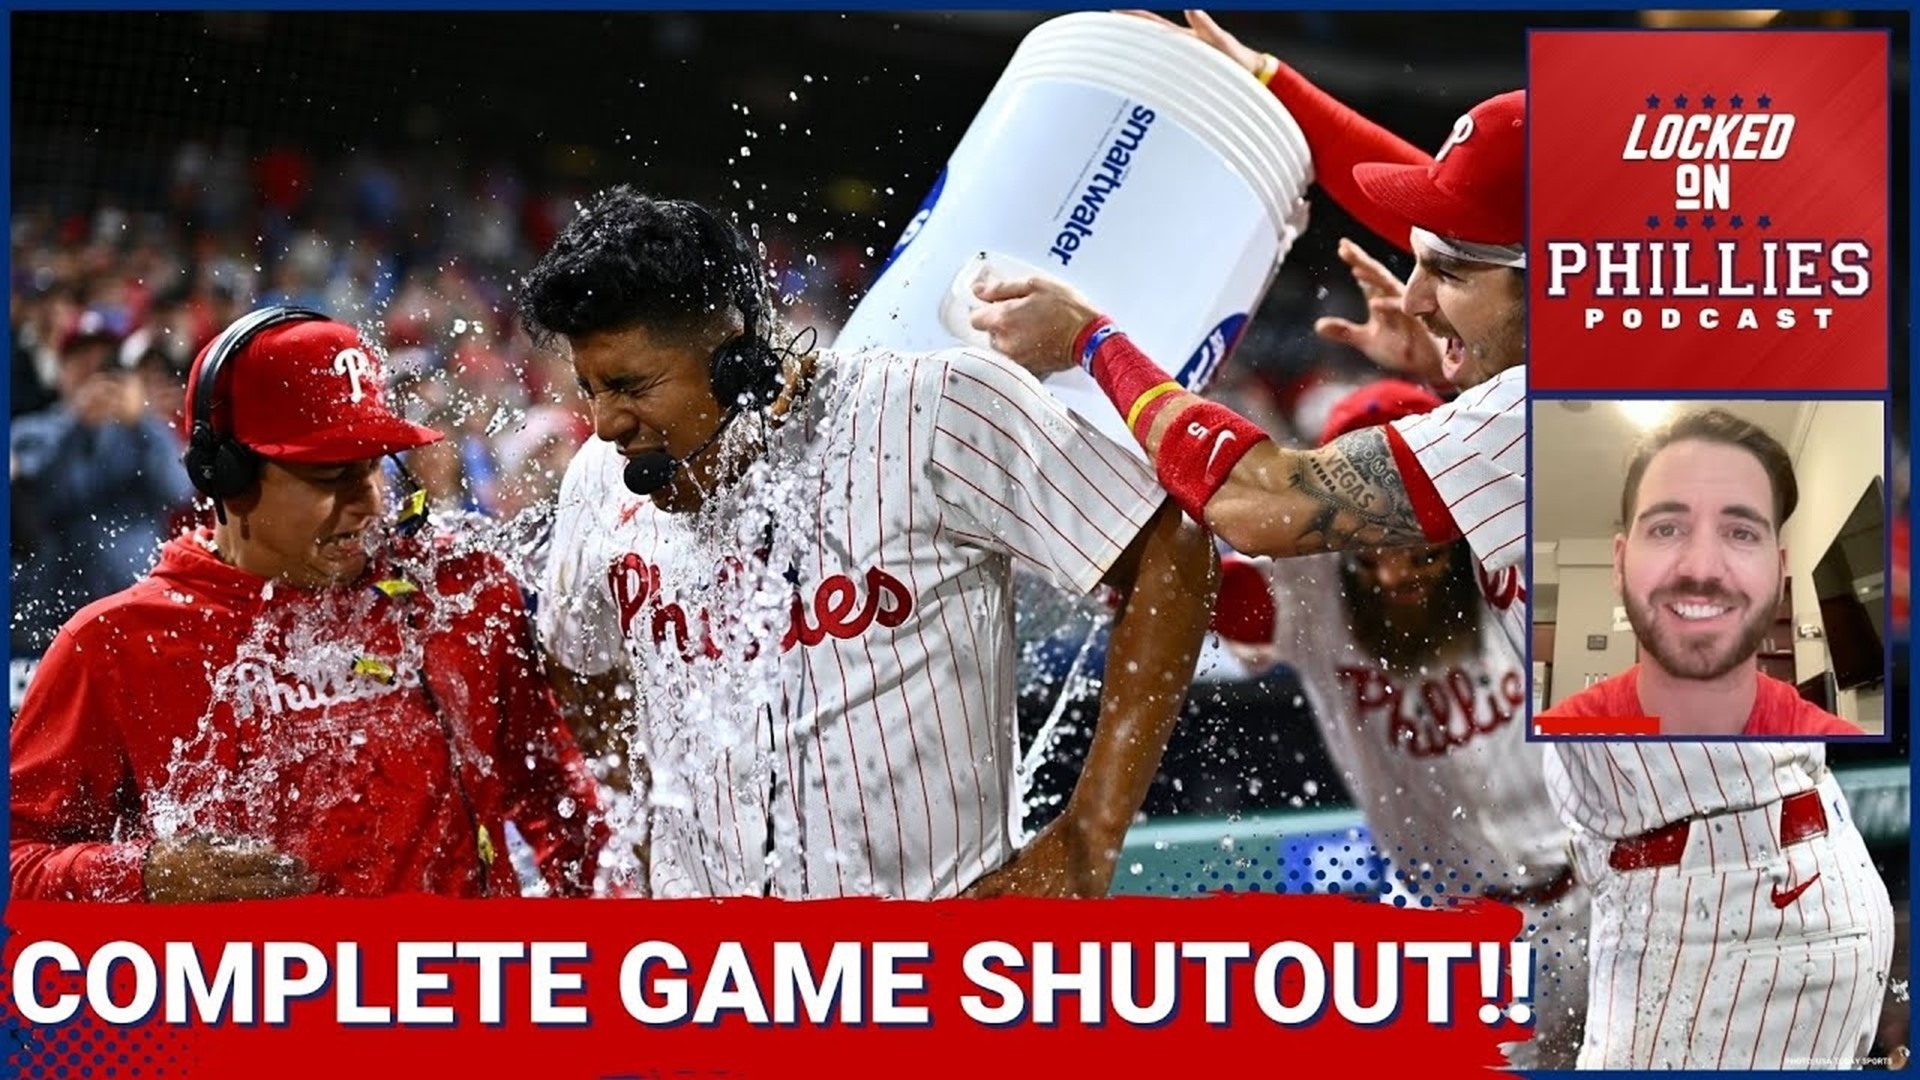 In today's episode, Connor cannot help but rave about Ranger Suarez's complete game shutout for the Philadelphia Phillies that helped propel the team to a win.